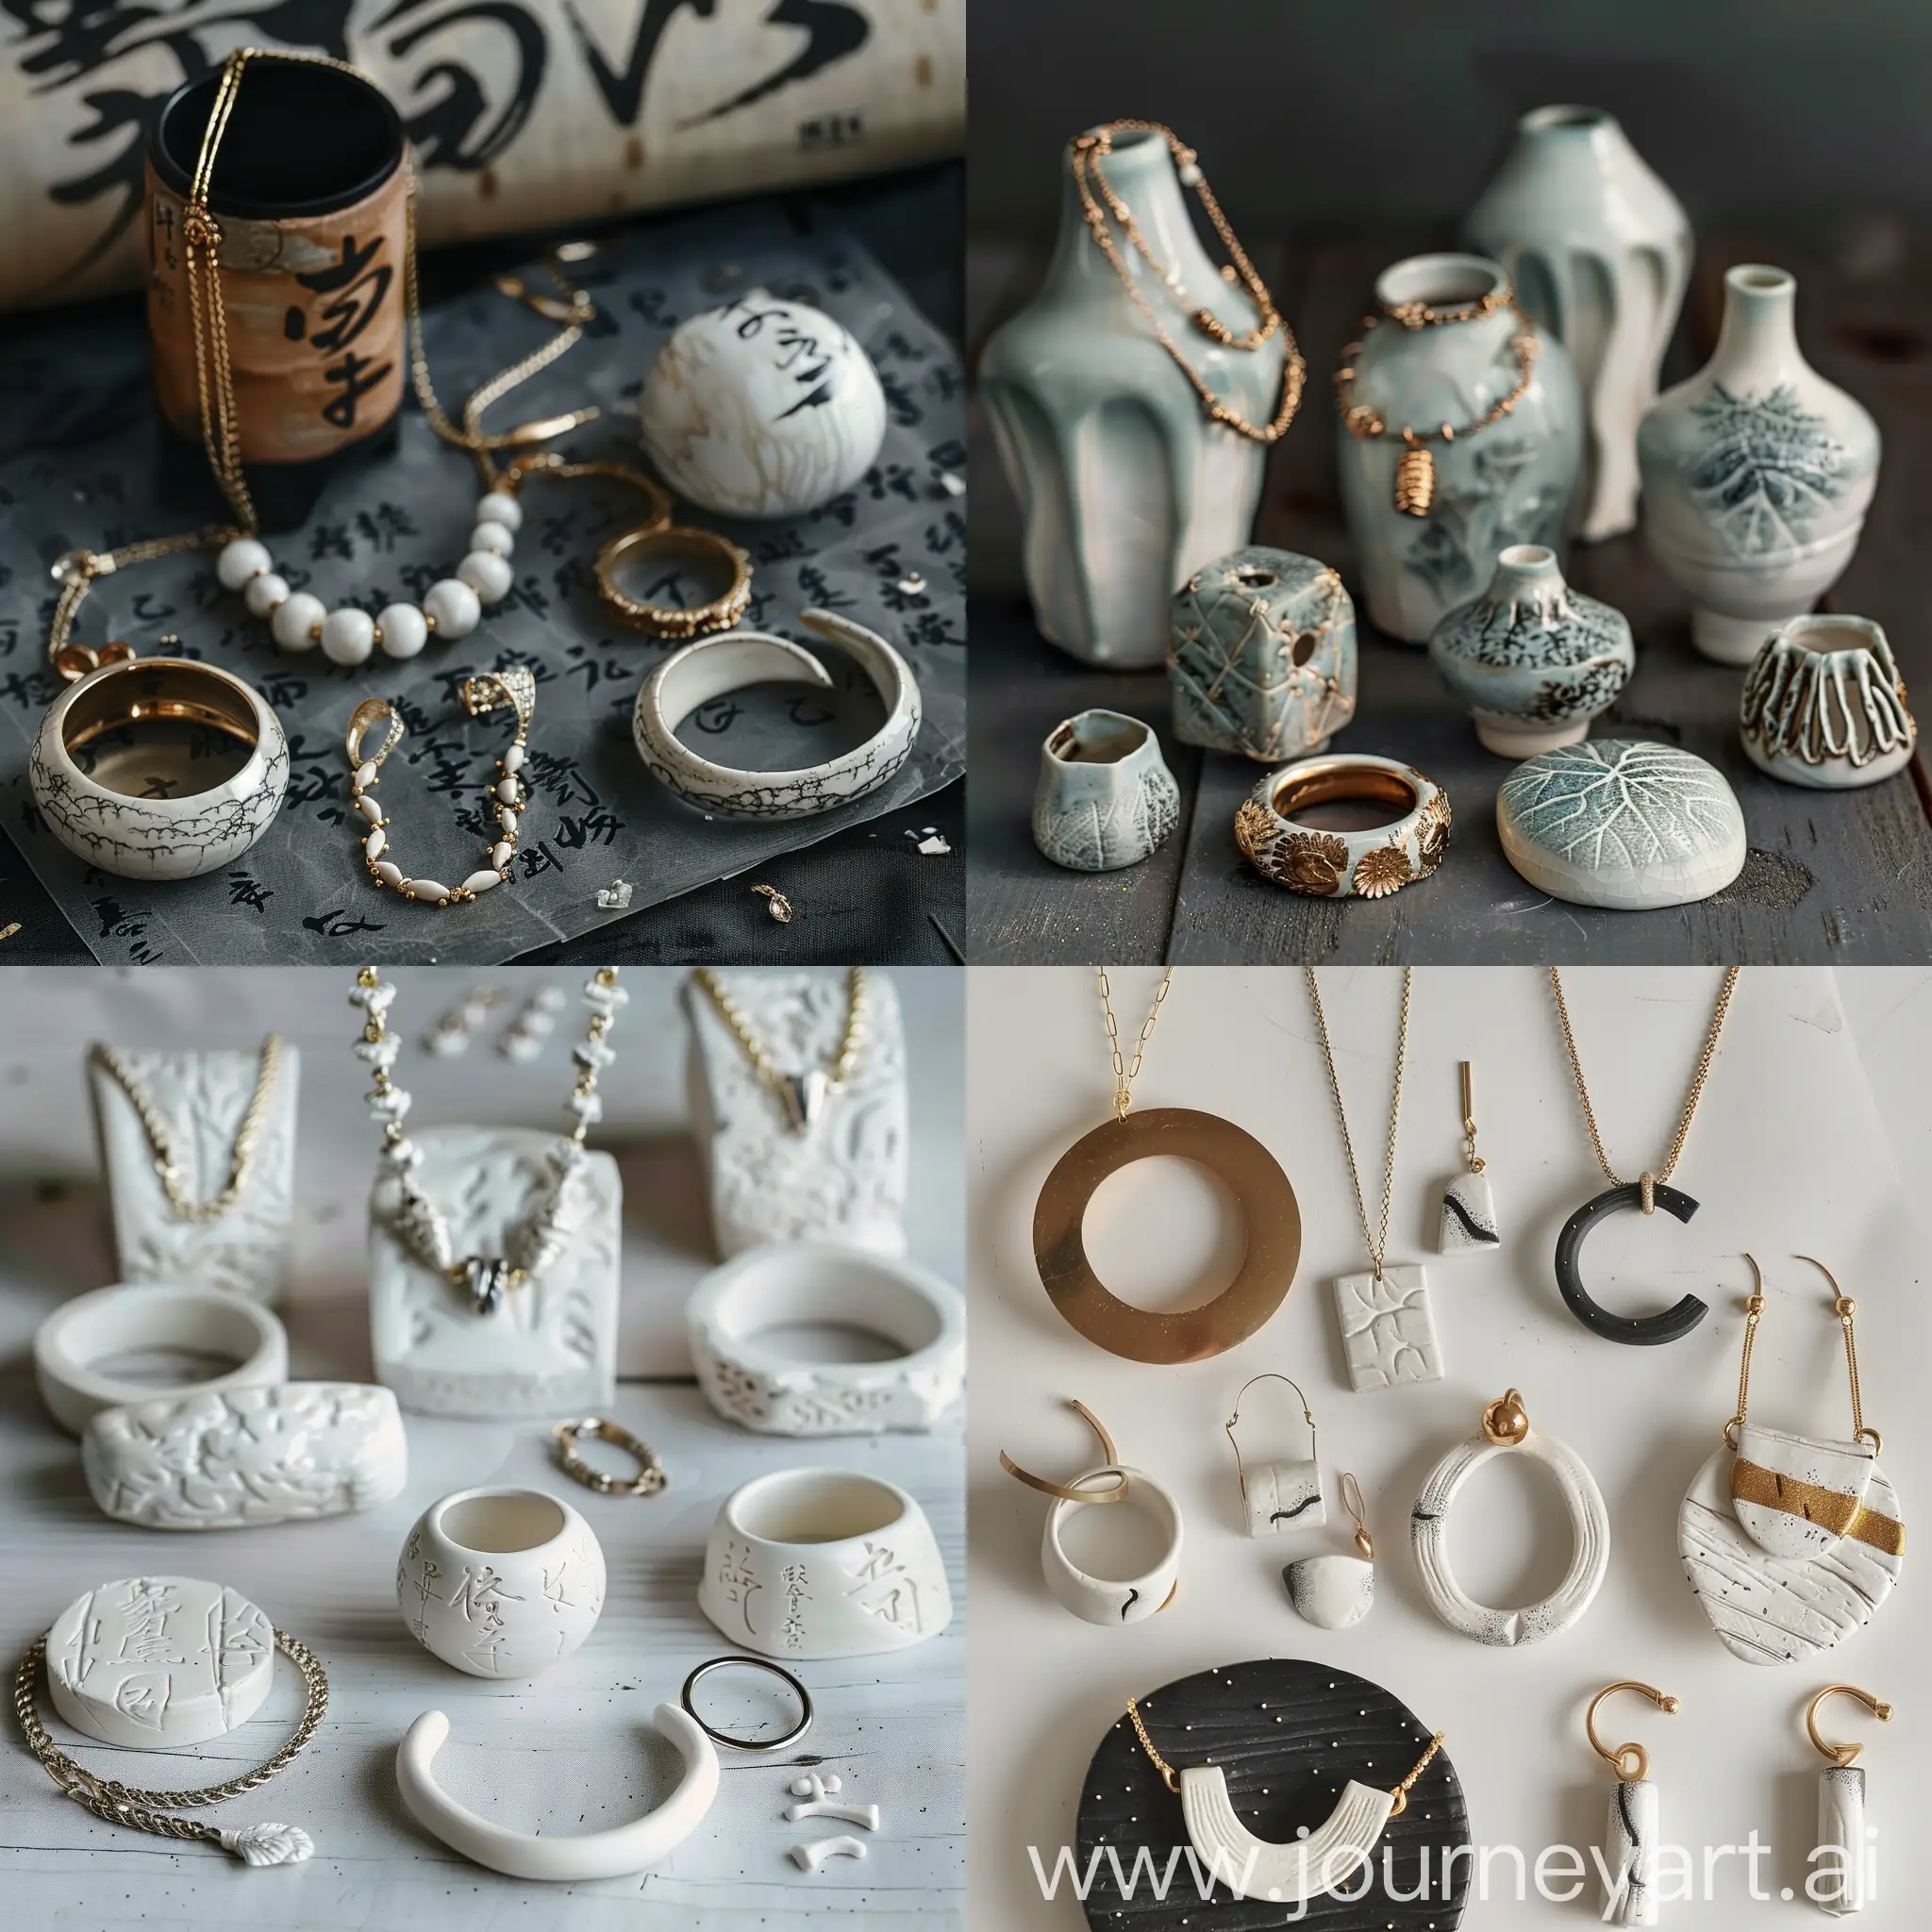 Expressive-Ceramic-Jewelry-Fusion-of-Pain-and-Chinese-Calligraphy-Inspiration